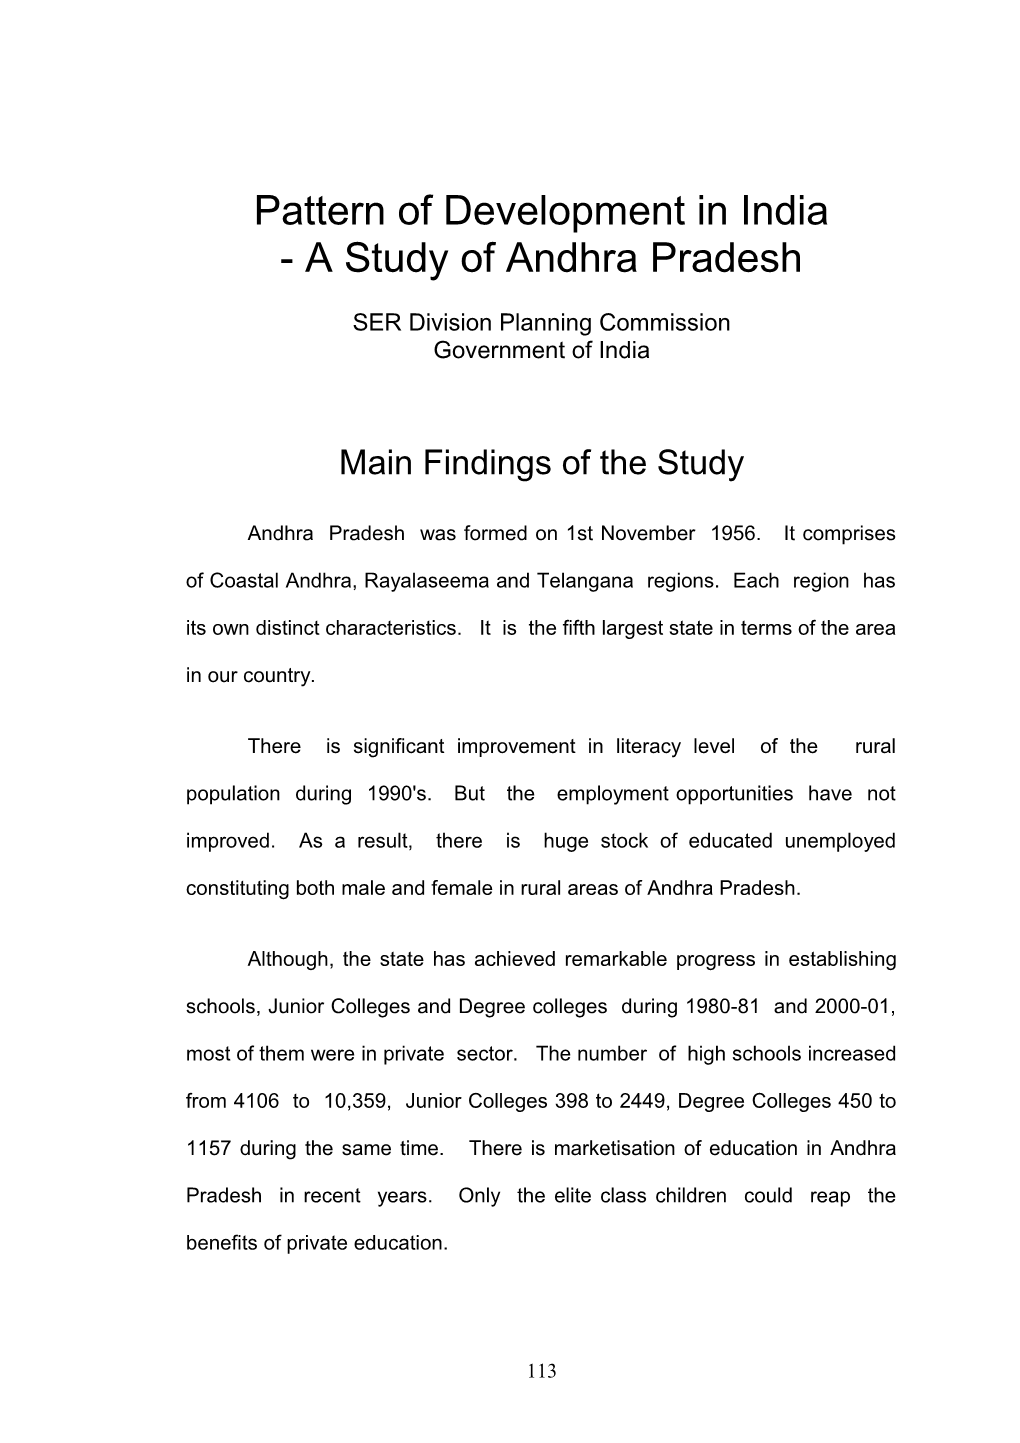 Pattern of Development in India - a Study of Andhra Pradesh